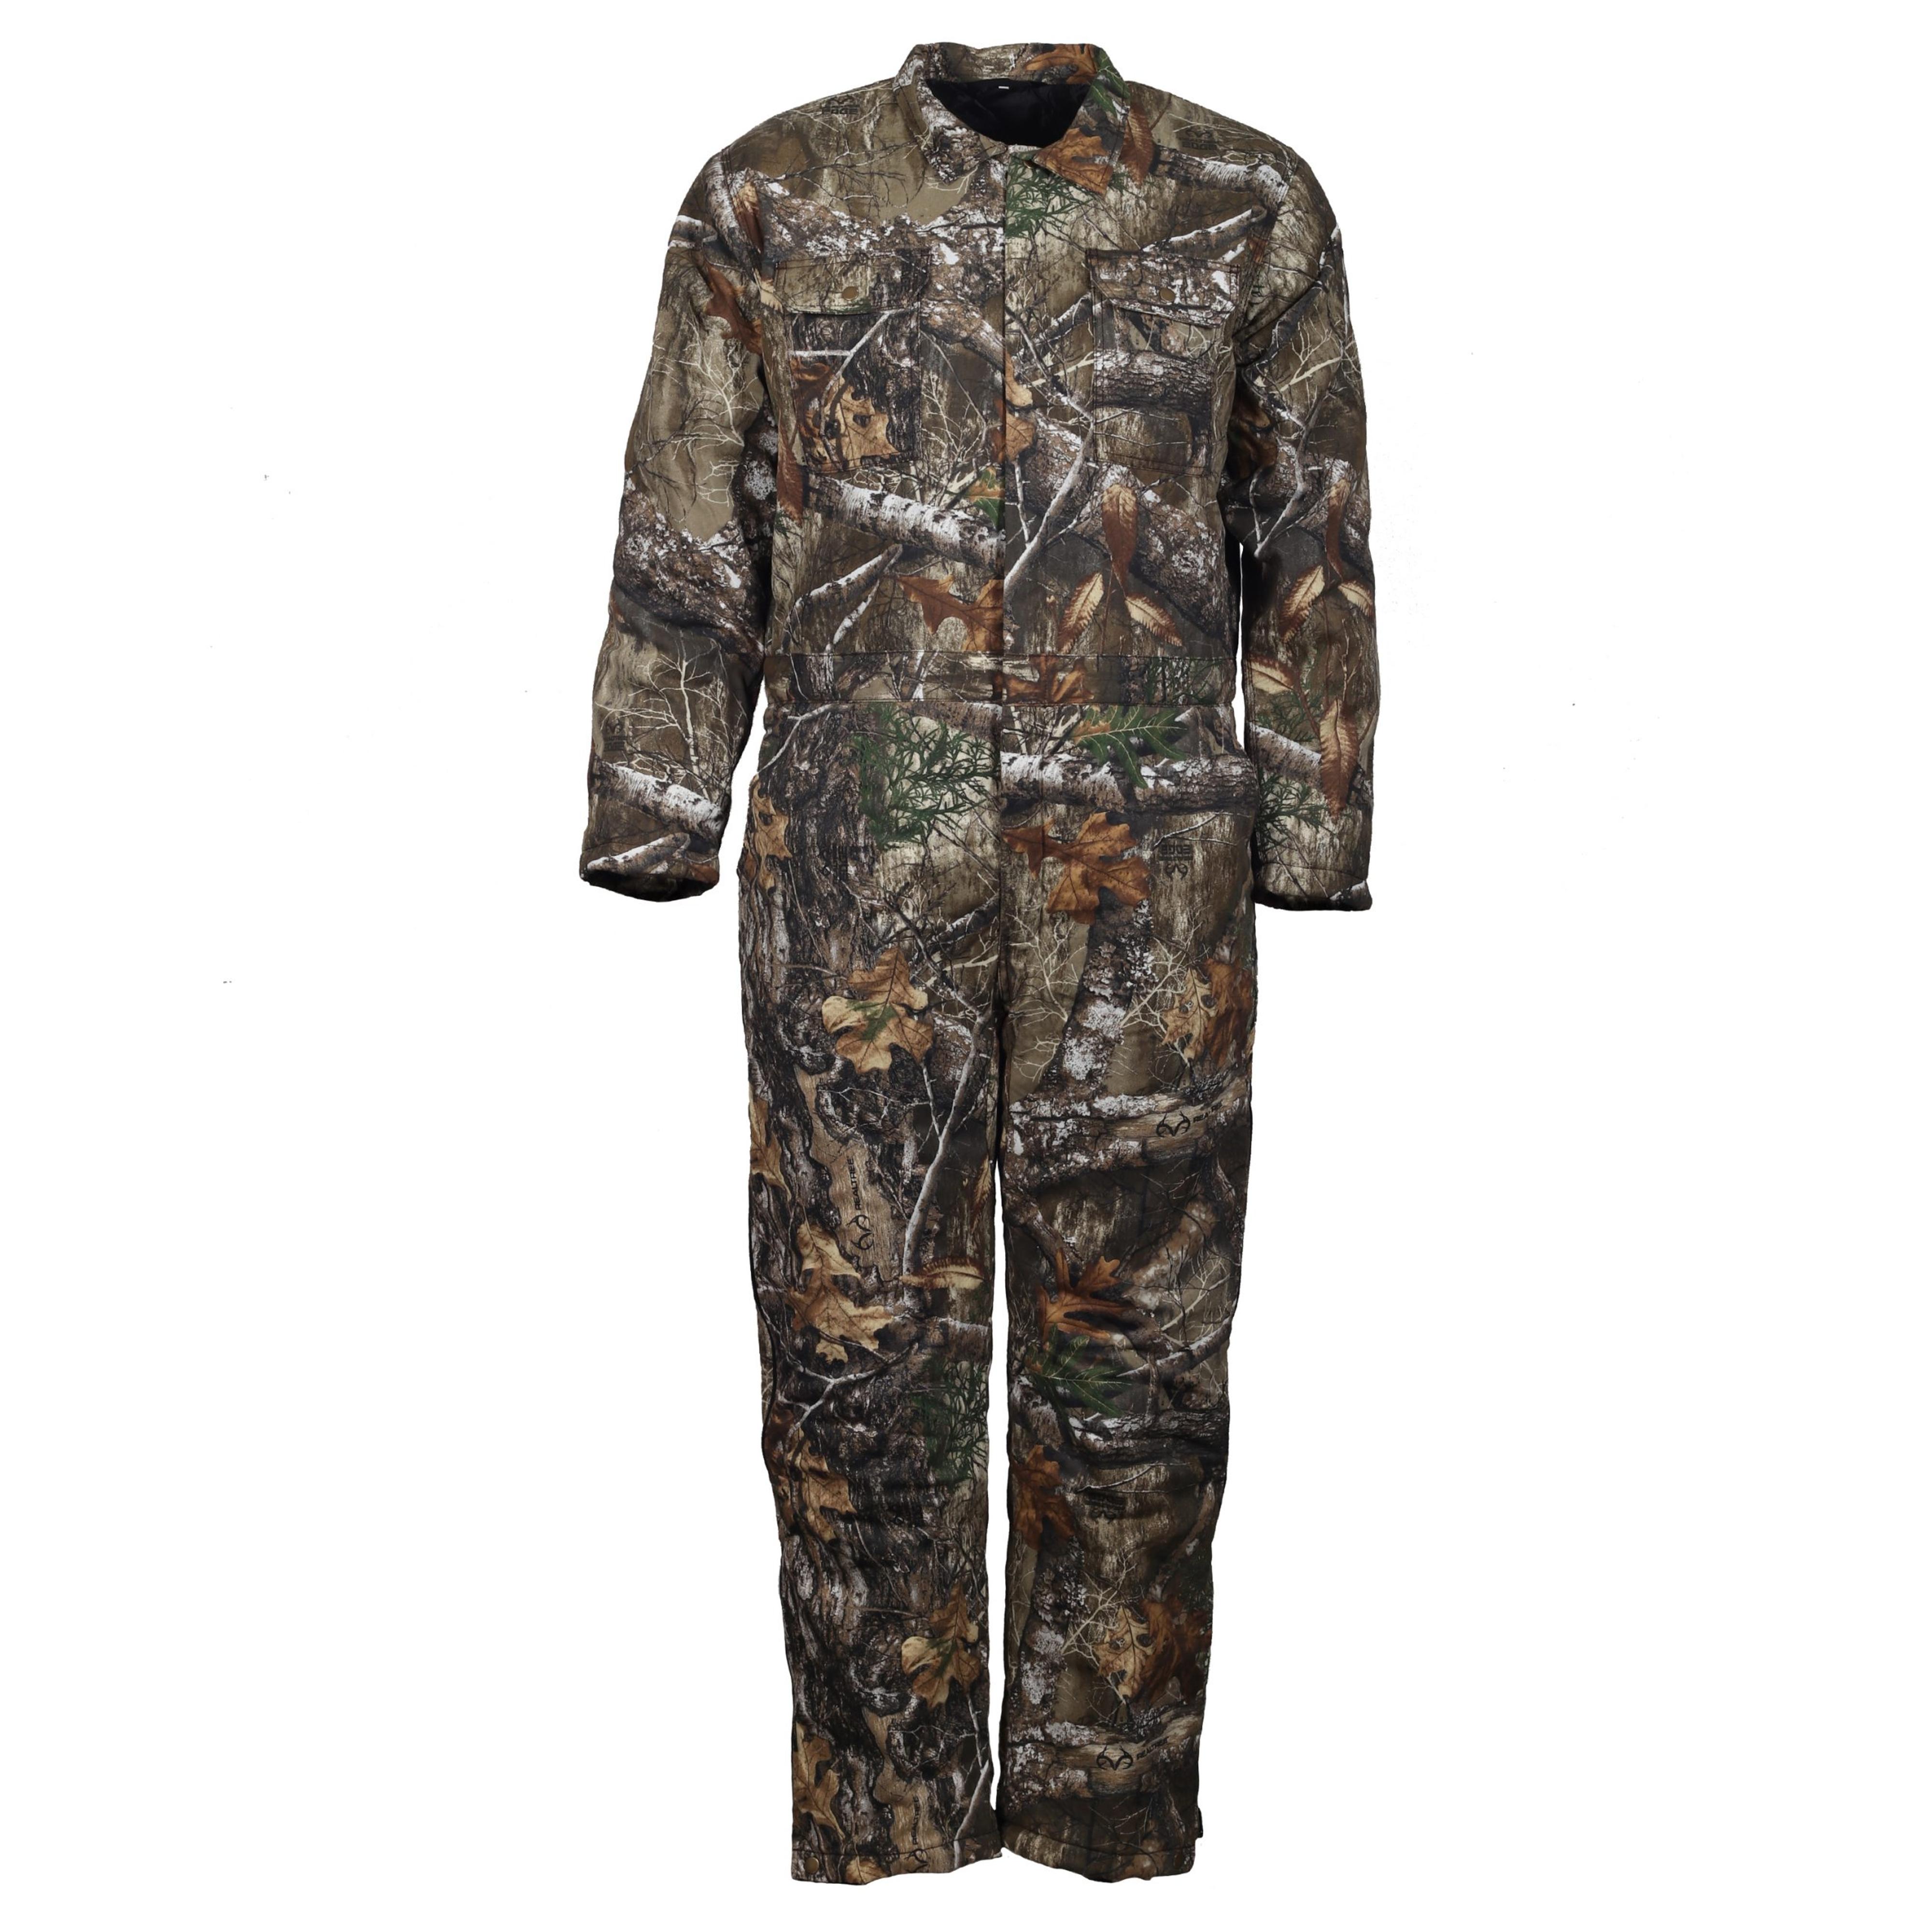  Insulated Tundra Coverall